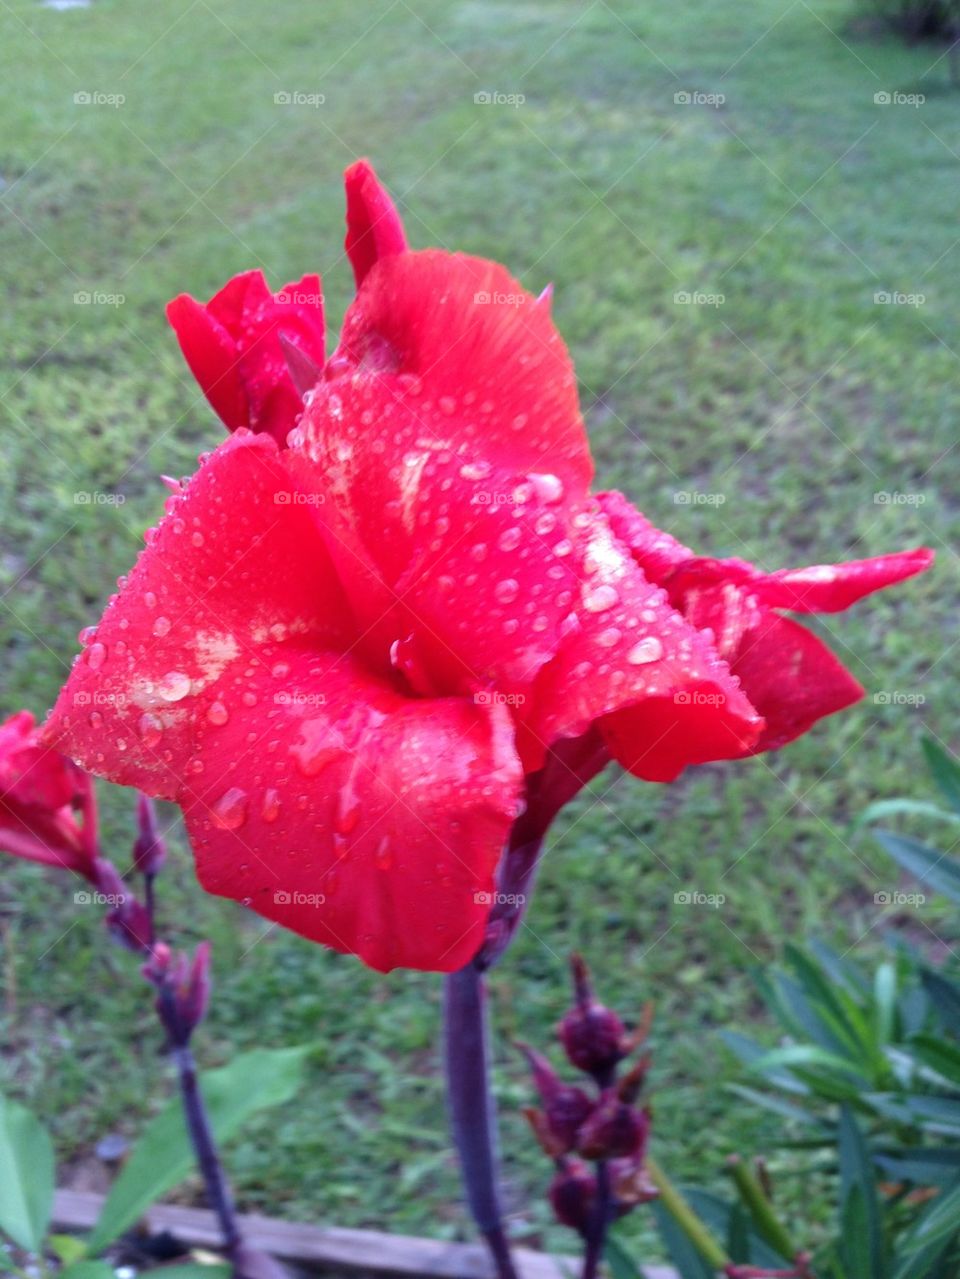 Flowers-Red Canna lily dripping in dew drops.